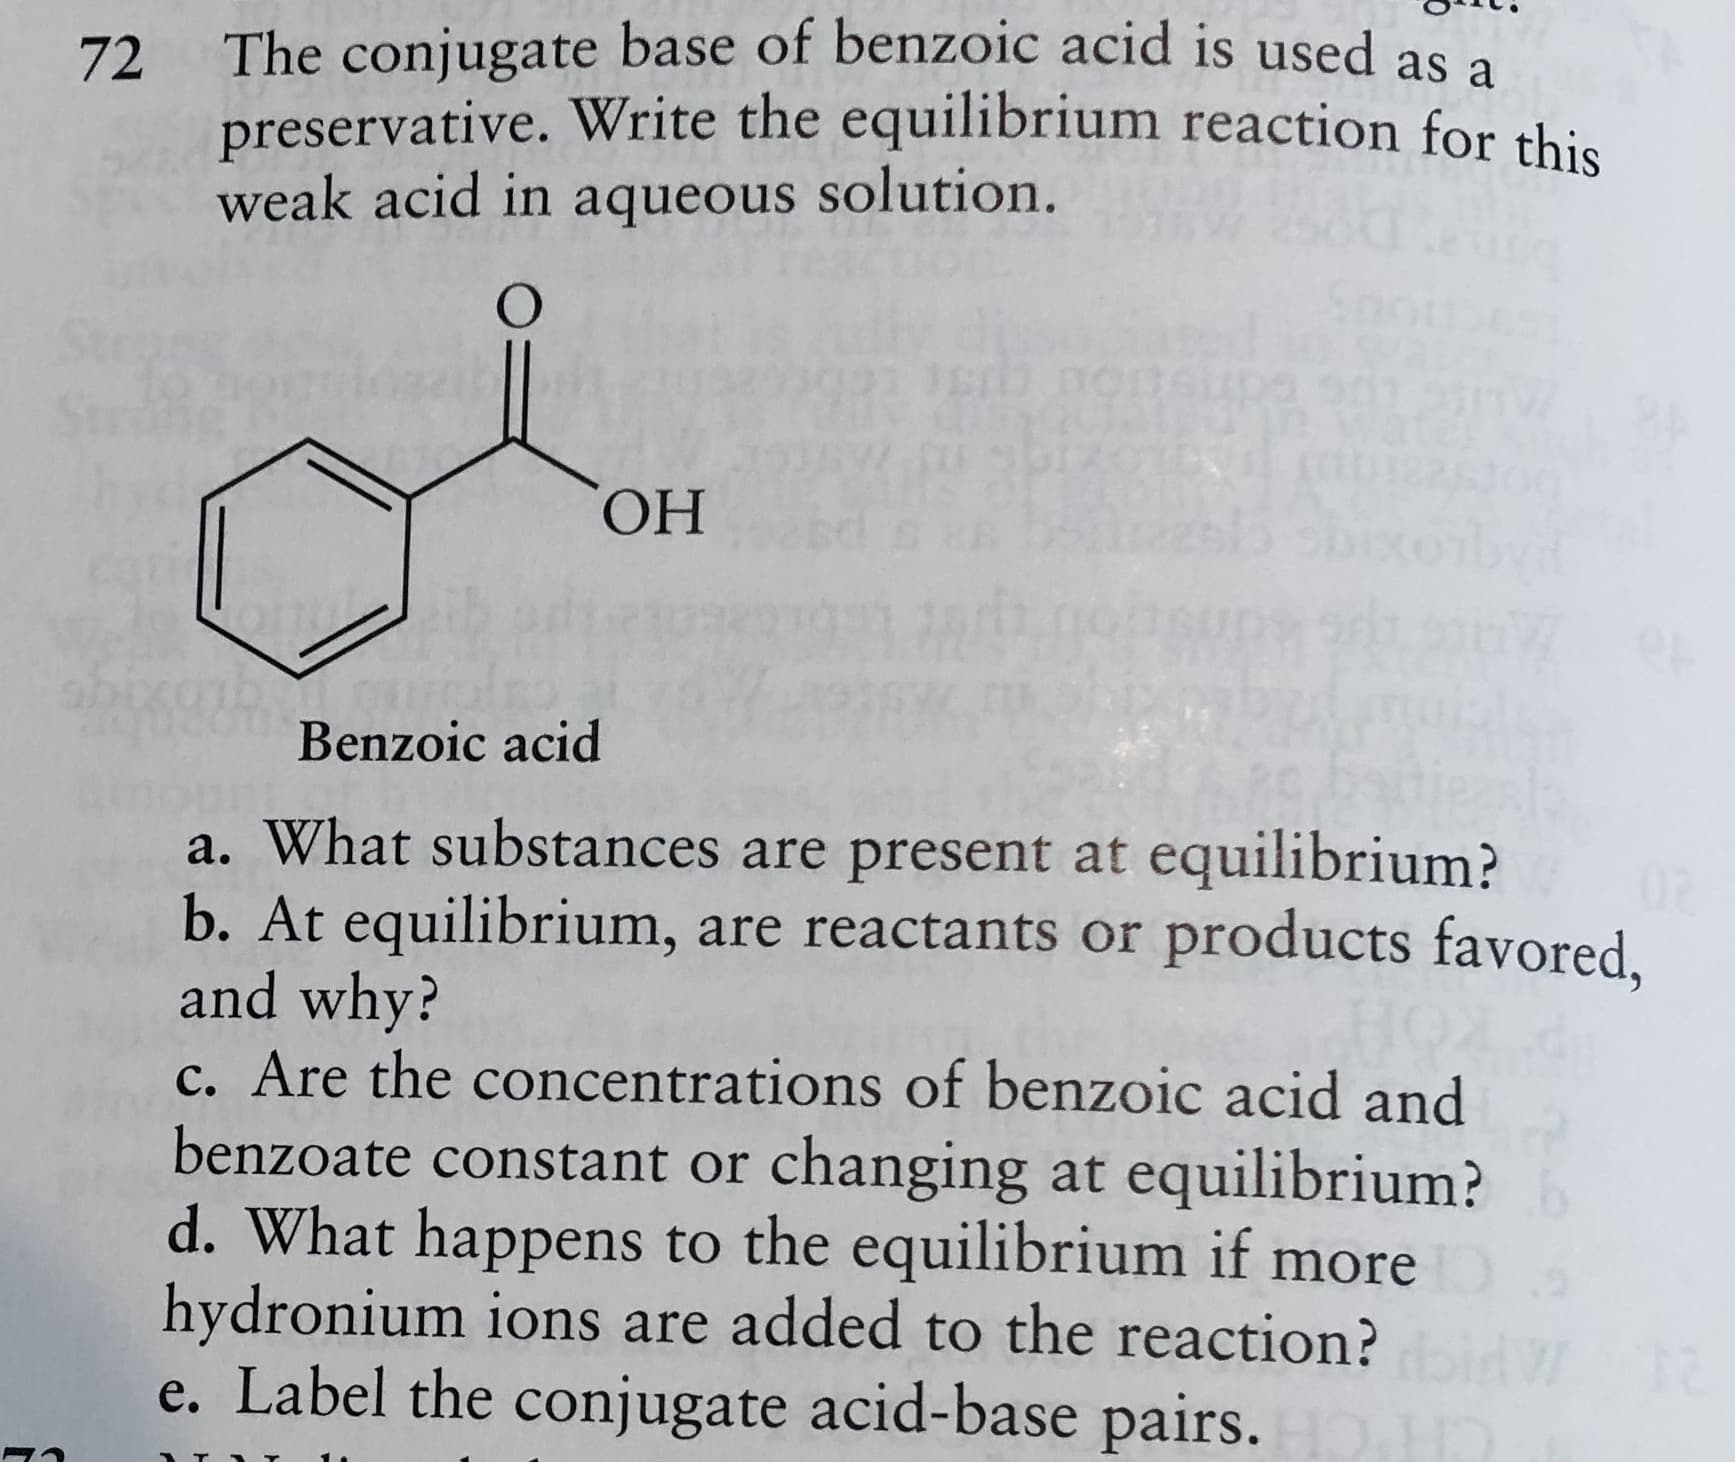 The conjugate base of benzoic acid is used as a
72
preservative. Write the equilibrium reaction for this
weak acid in aqueous solution.
ОН
Benzoic acid
a. What substances are present at equilibrium?
b. At equilibrium, are reactants or products favored,
and why?
c. Are the concentrations of benzoic acid and
benzoate constant or changing at equilibrium?
d. What happens to the equilibrium if more
hydronium ions are added to the reaction?
e. Label the conjugate acid-base pairs.
